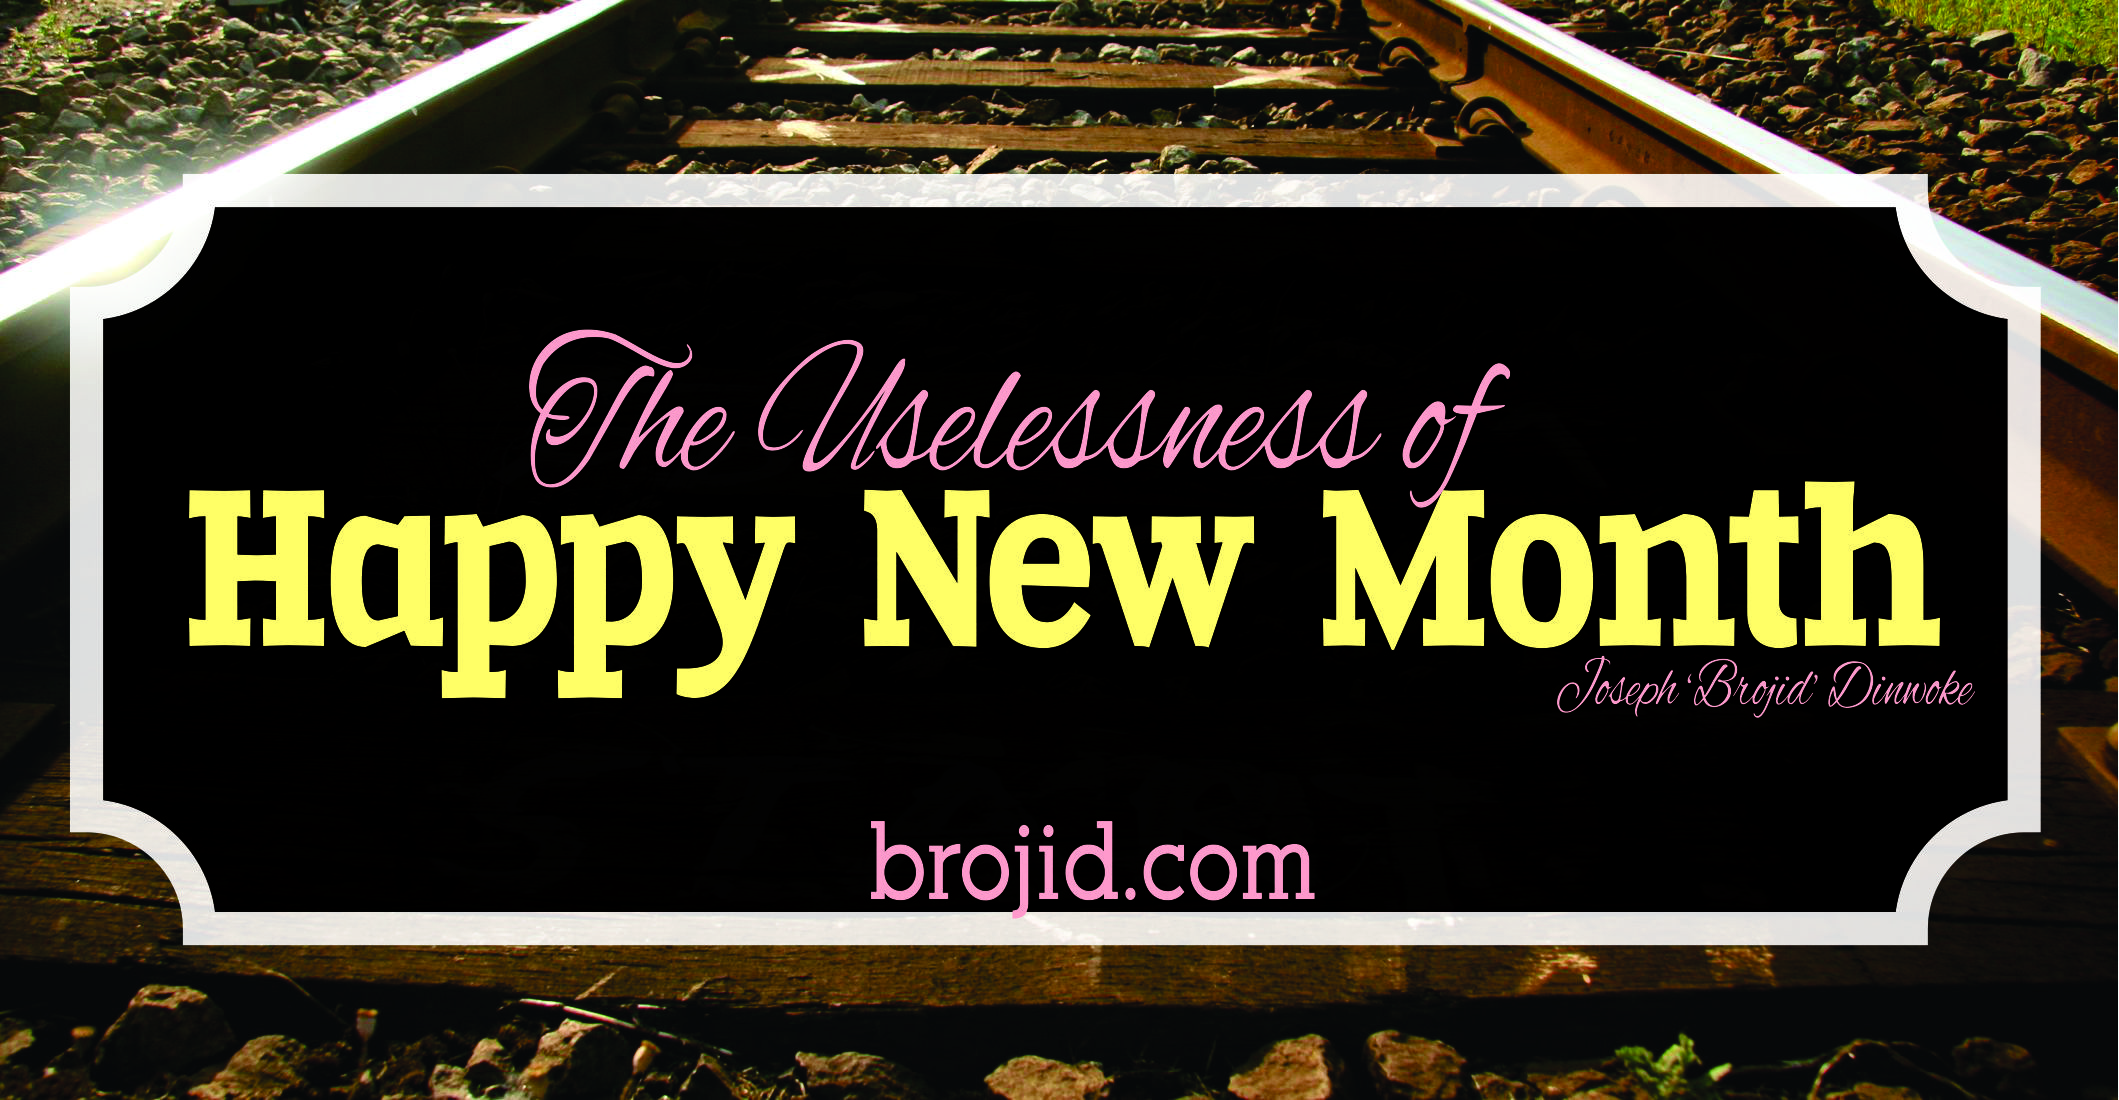 THE USELESSNESS OF HAPPY NEW MONTH